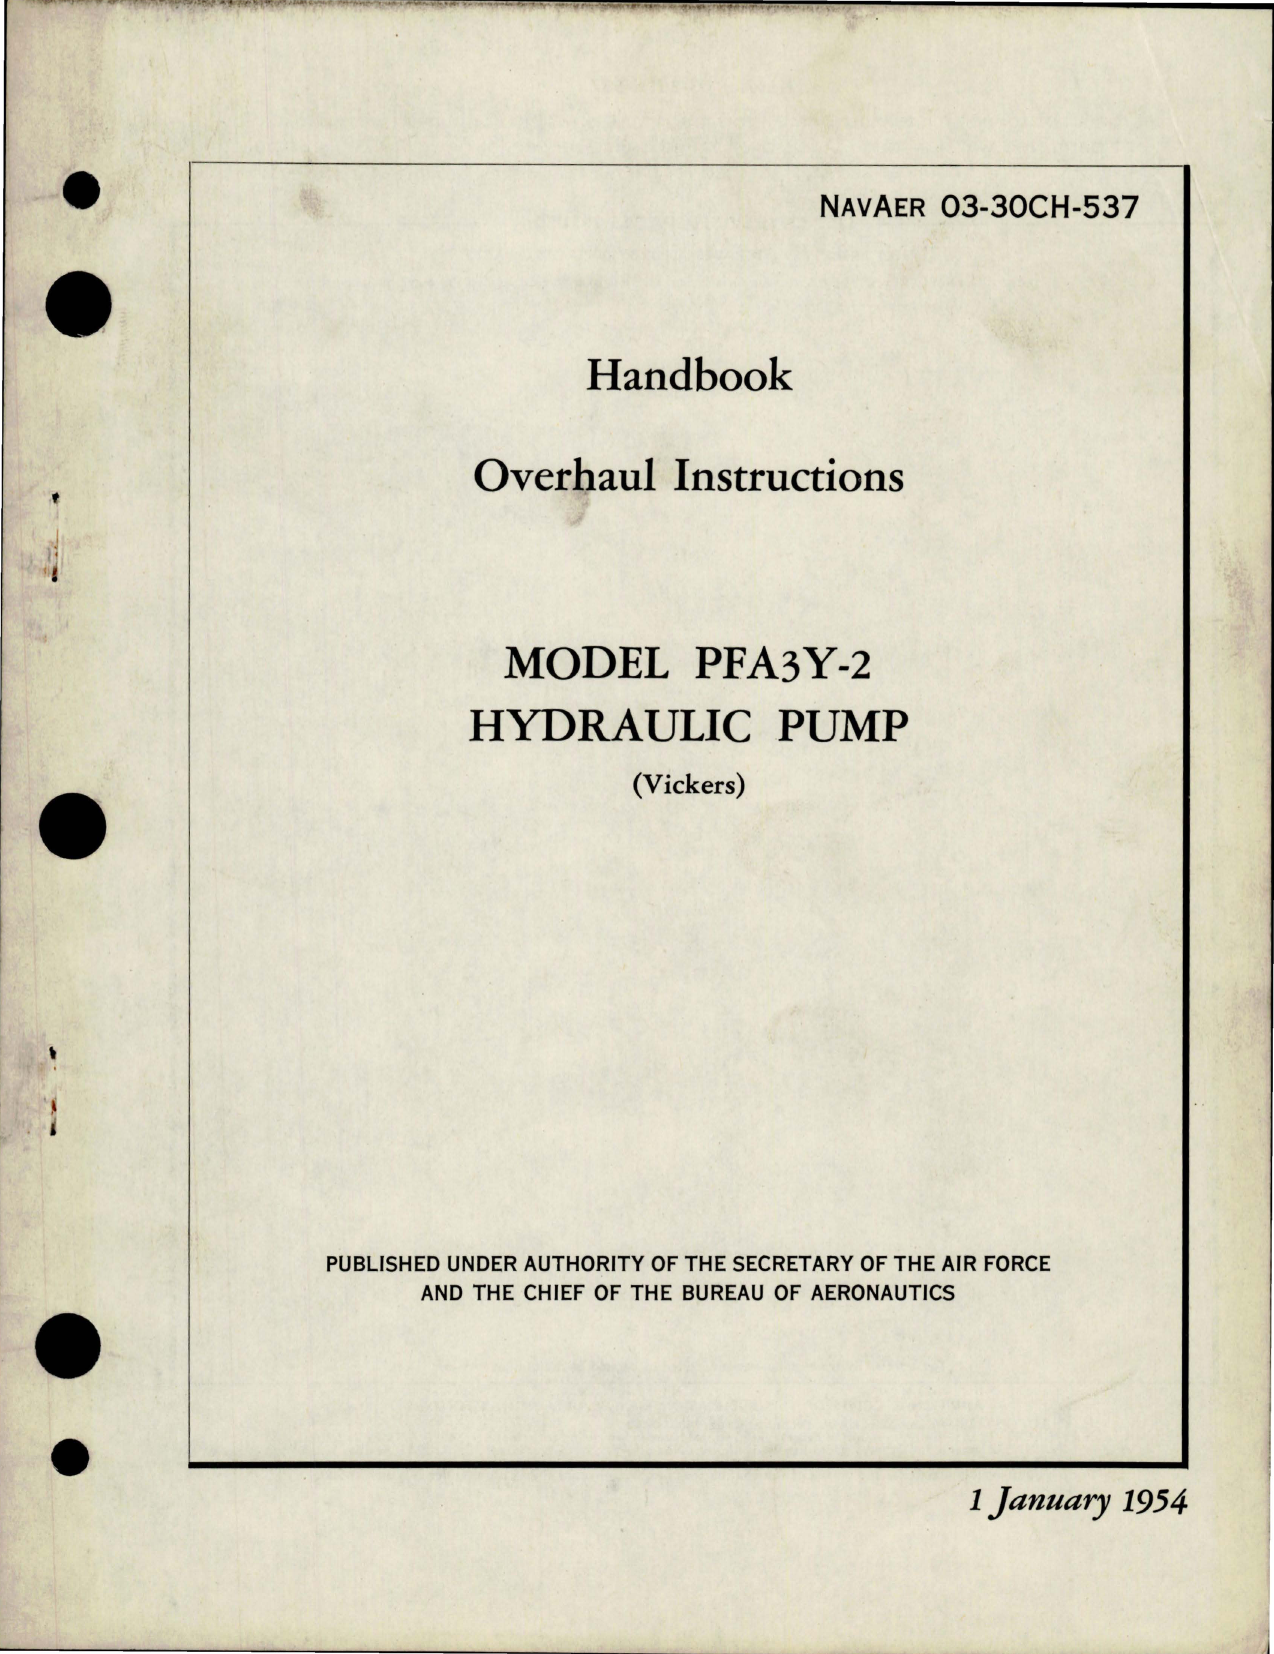 Sample page 1 from AirCorps Library document: Overhaul Instructions for Hydraulic Pump - Model PFA3Y-2 